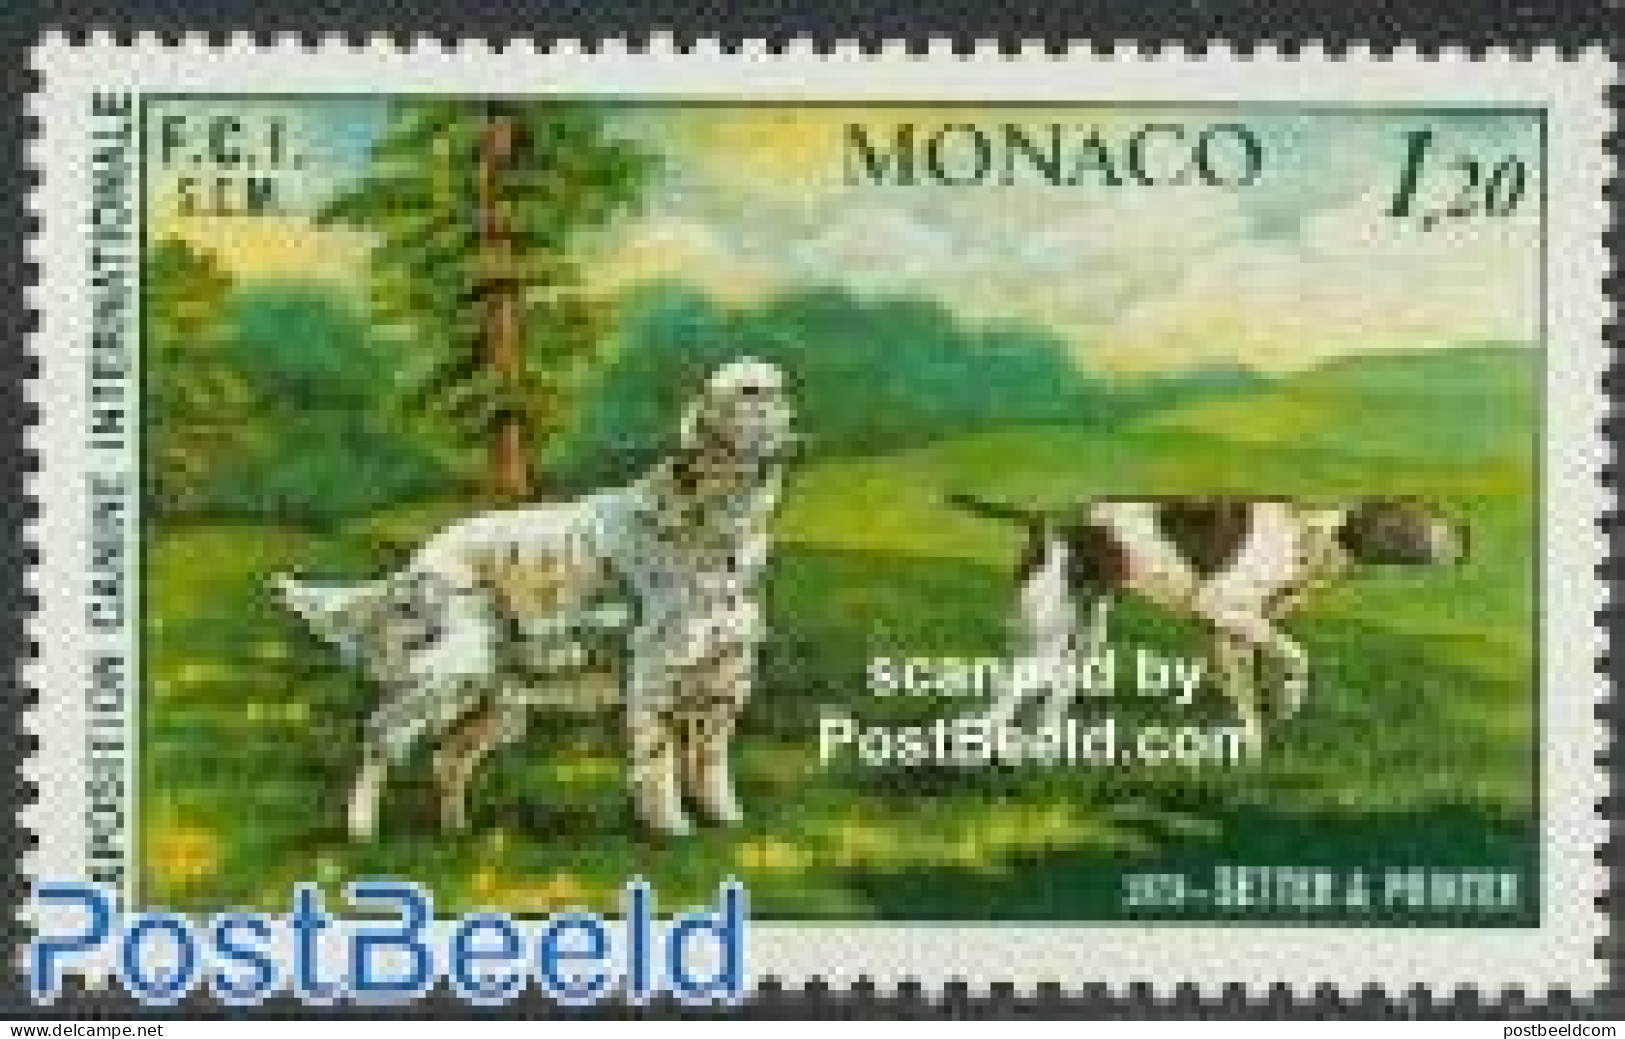 Monaco 1979 Dog Exposition 1v, Mint NH, Nature - Dogs - Neufs